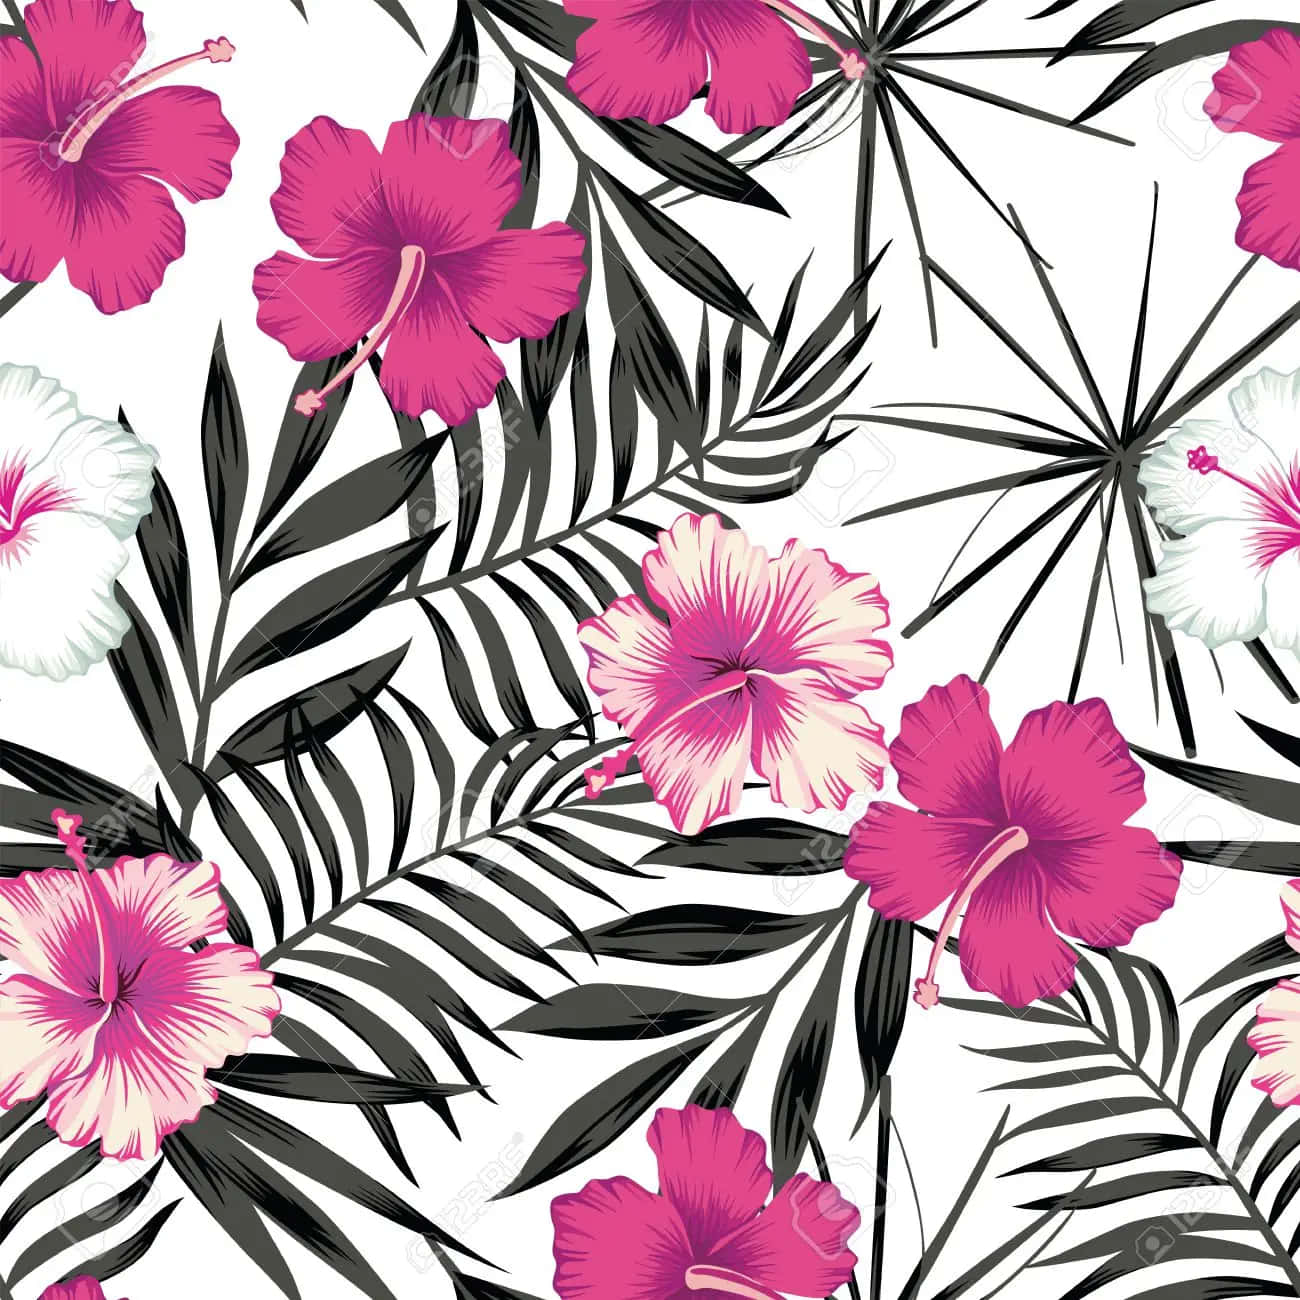 Floral vector pink black wallpaper Seamless vector dark floral pattern  with pink and white retro roses on black background  CanStock